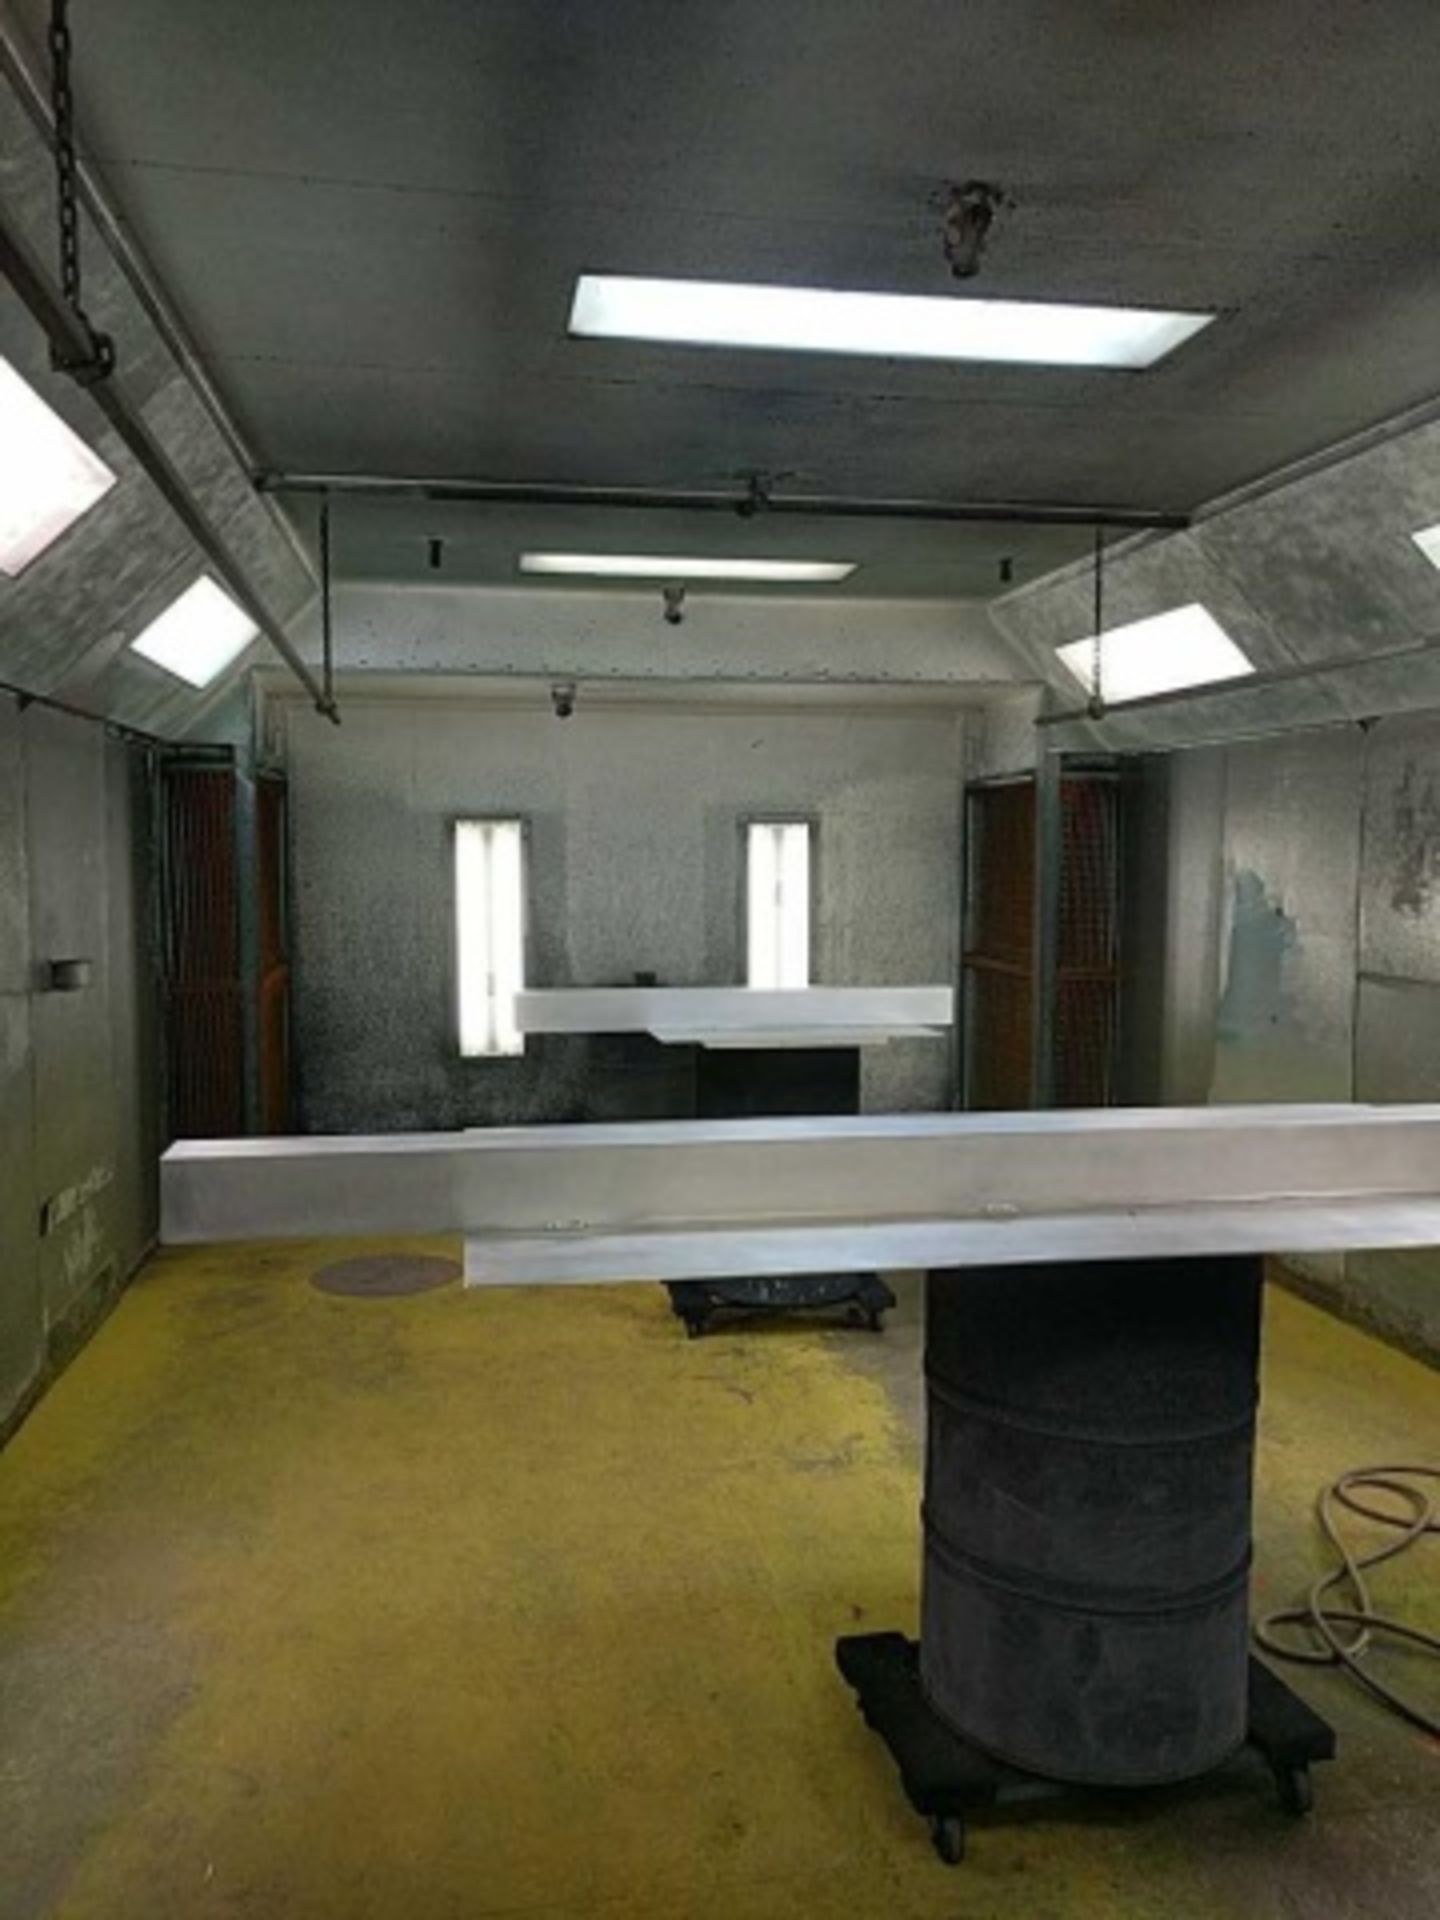 Binks Paint Spray Booth (#1) - Image 4 of 9